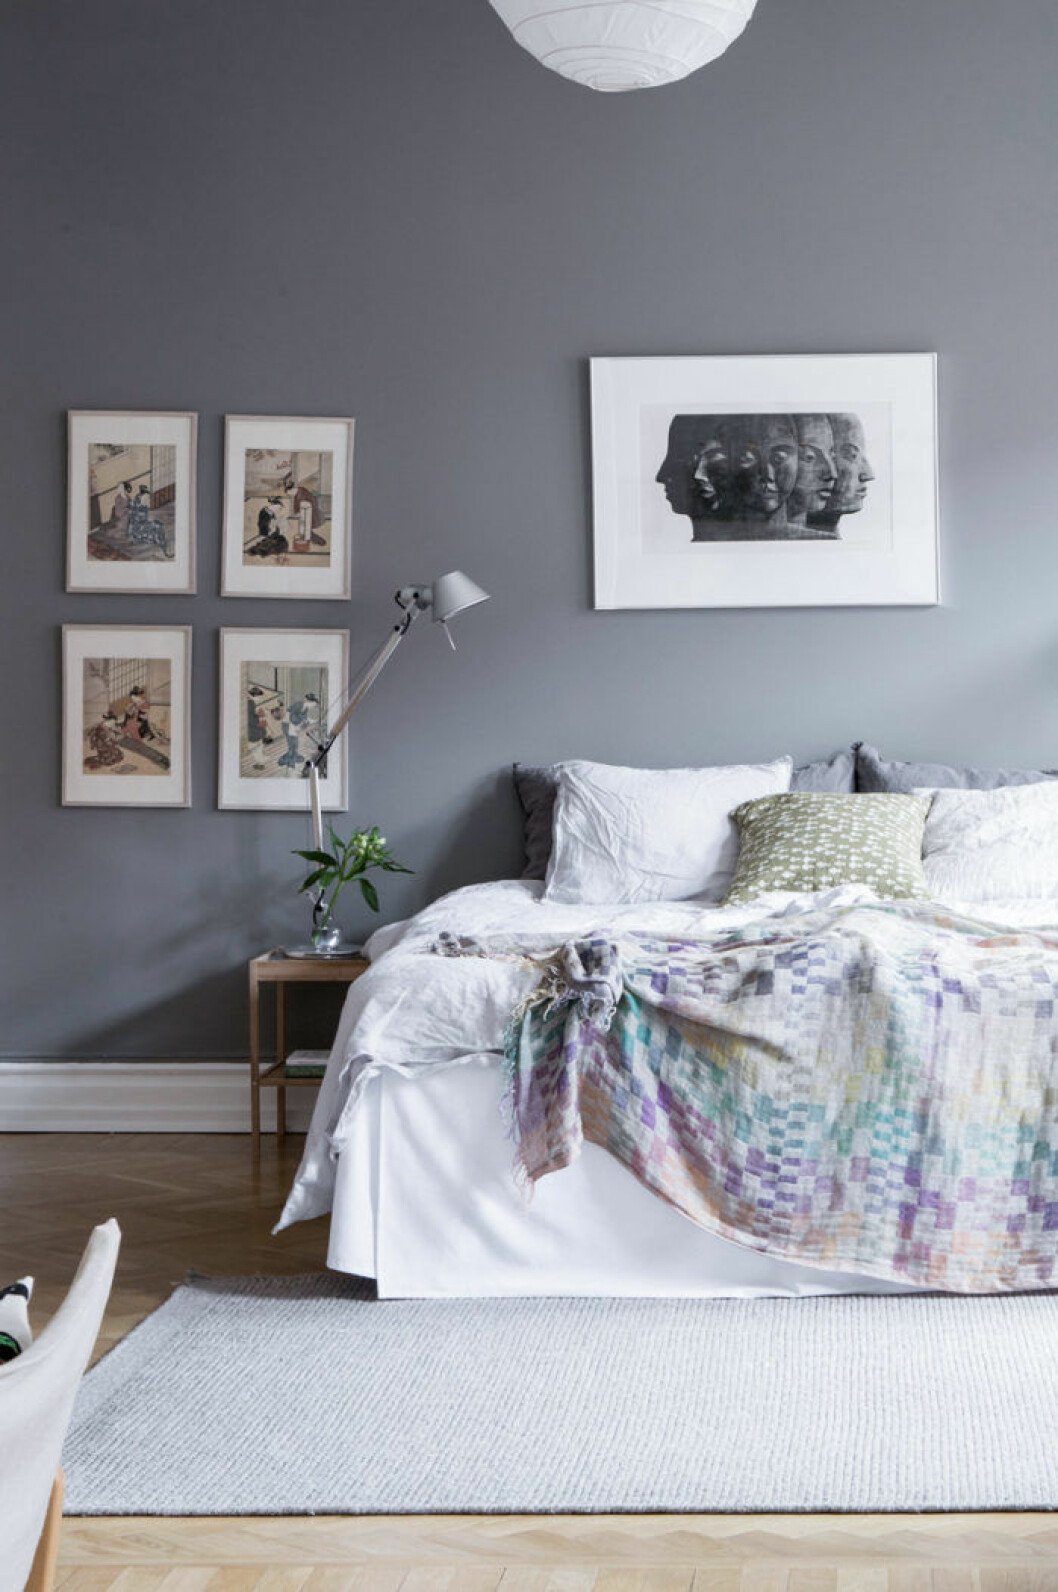 Scandinavian decoration and ideas. Bedroom with grey painted walls and art. Cozy bedding.